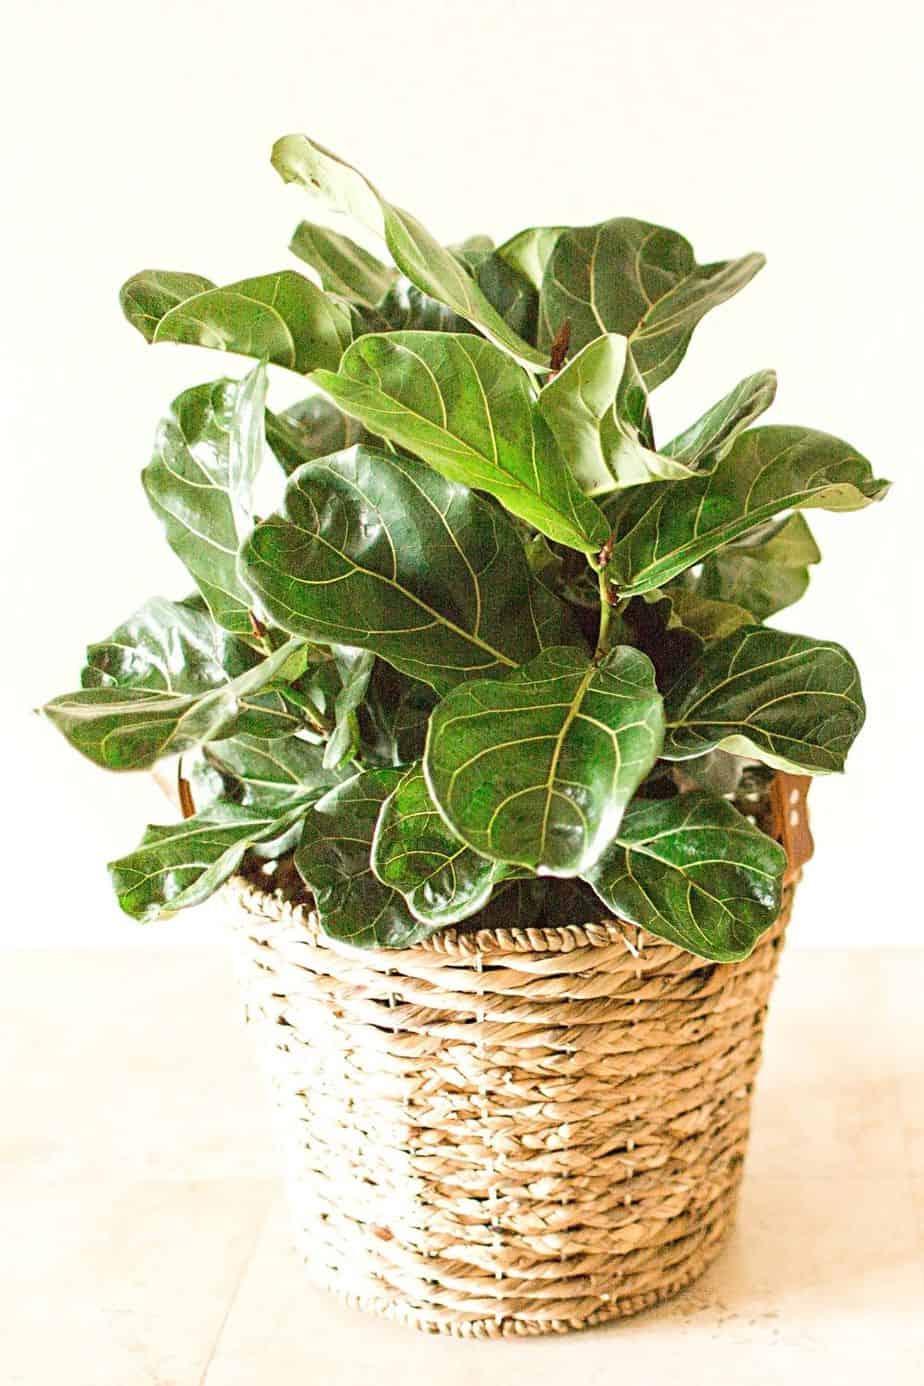 Make sure to water Fiddle Leaf Figs properly as they're water-sensitive plants